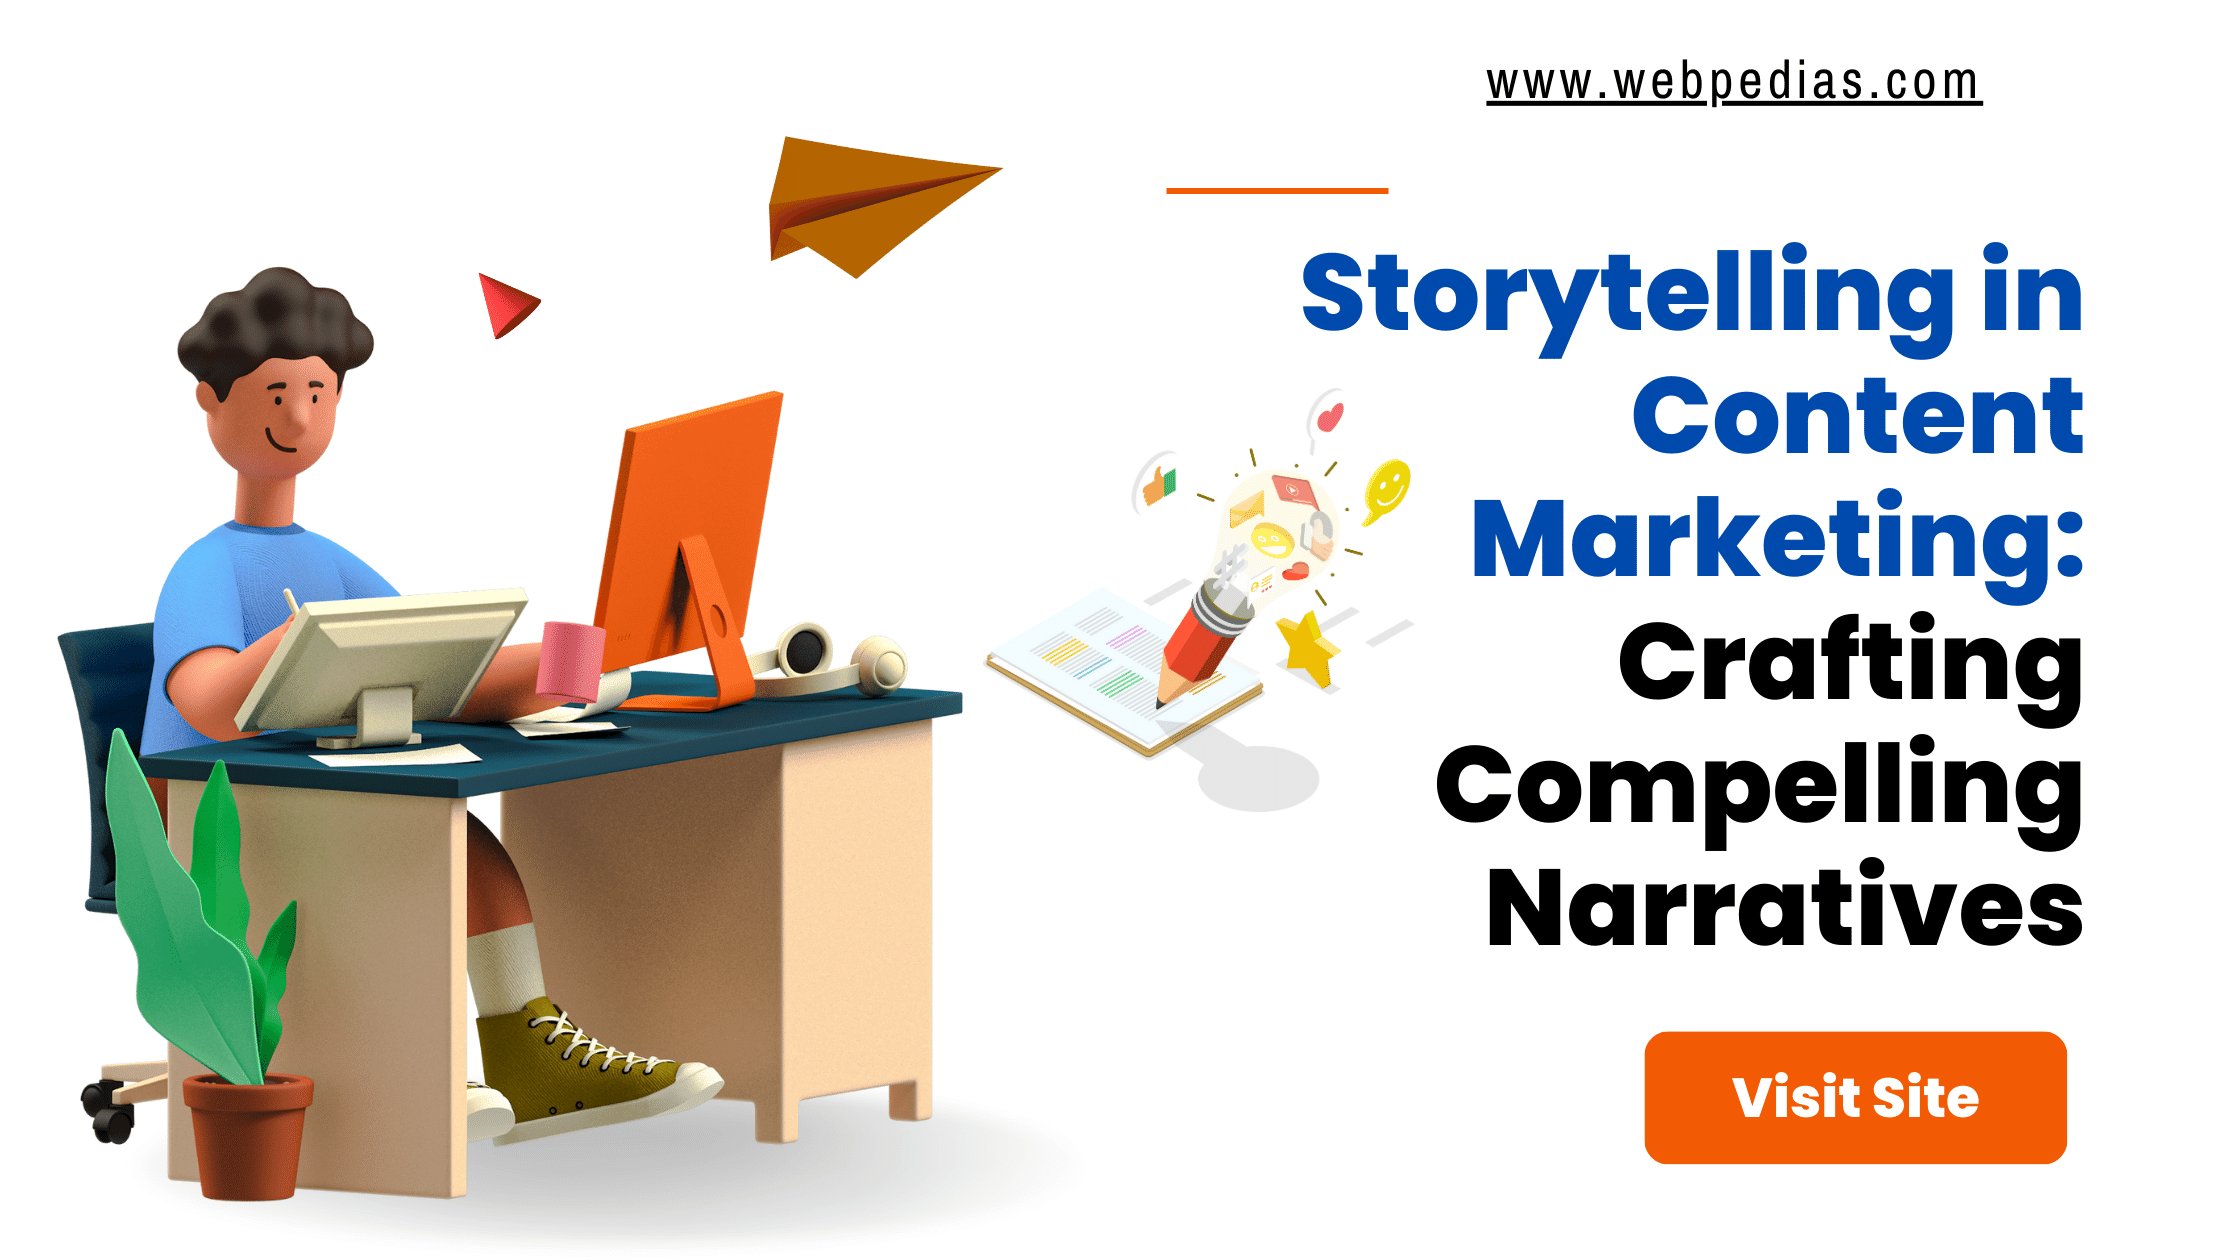 Storytelling in Content Marketing: Crafting Compelling Narratives